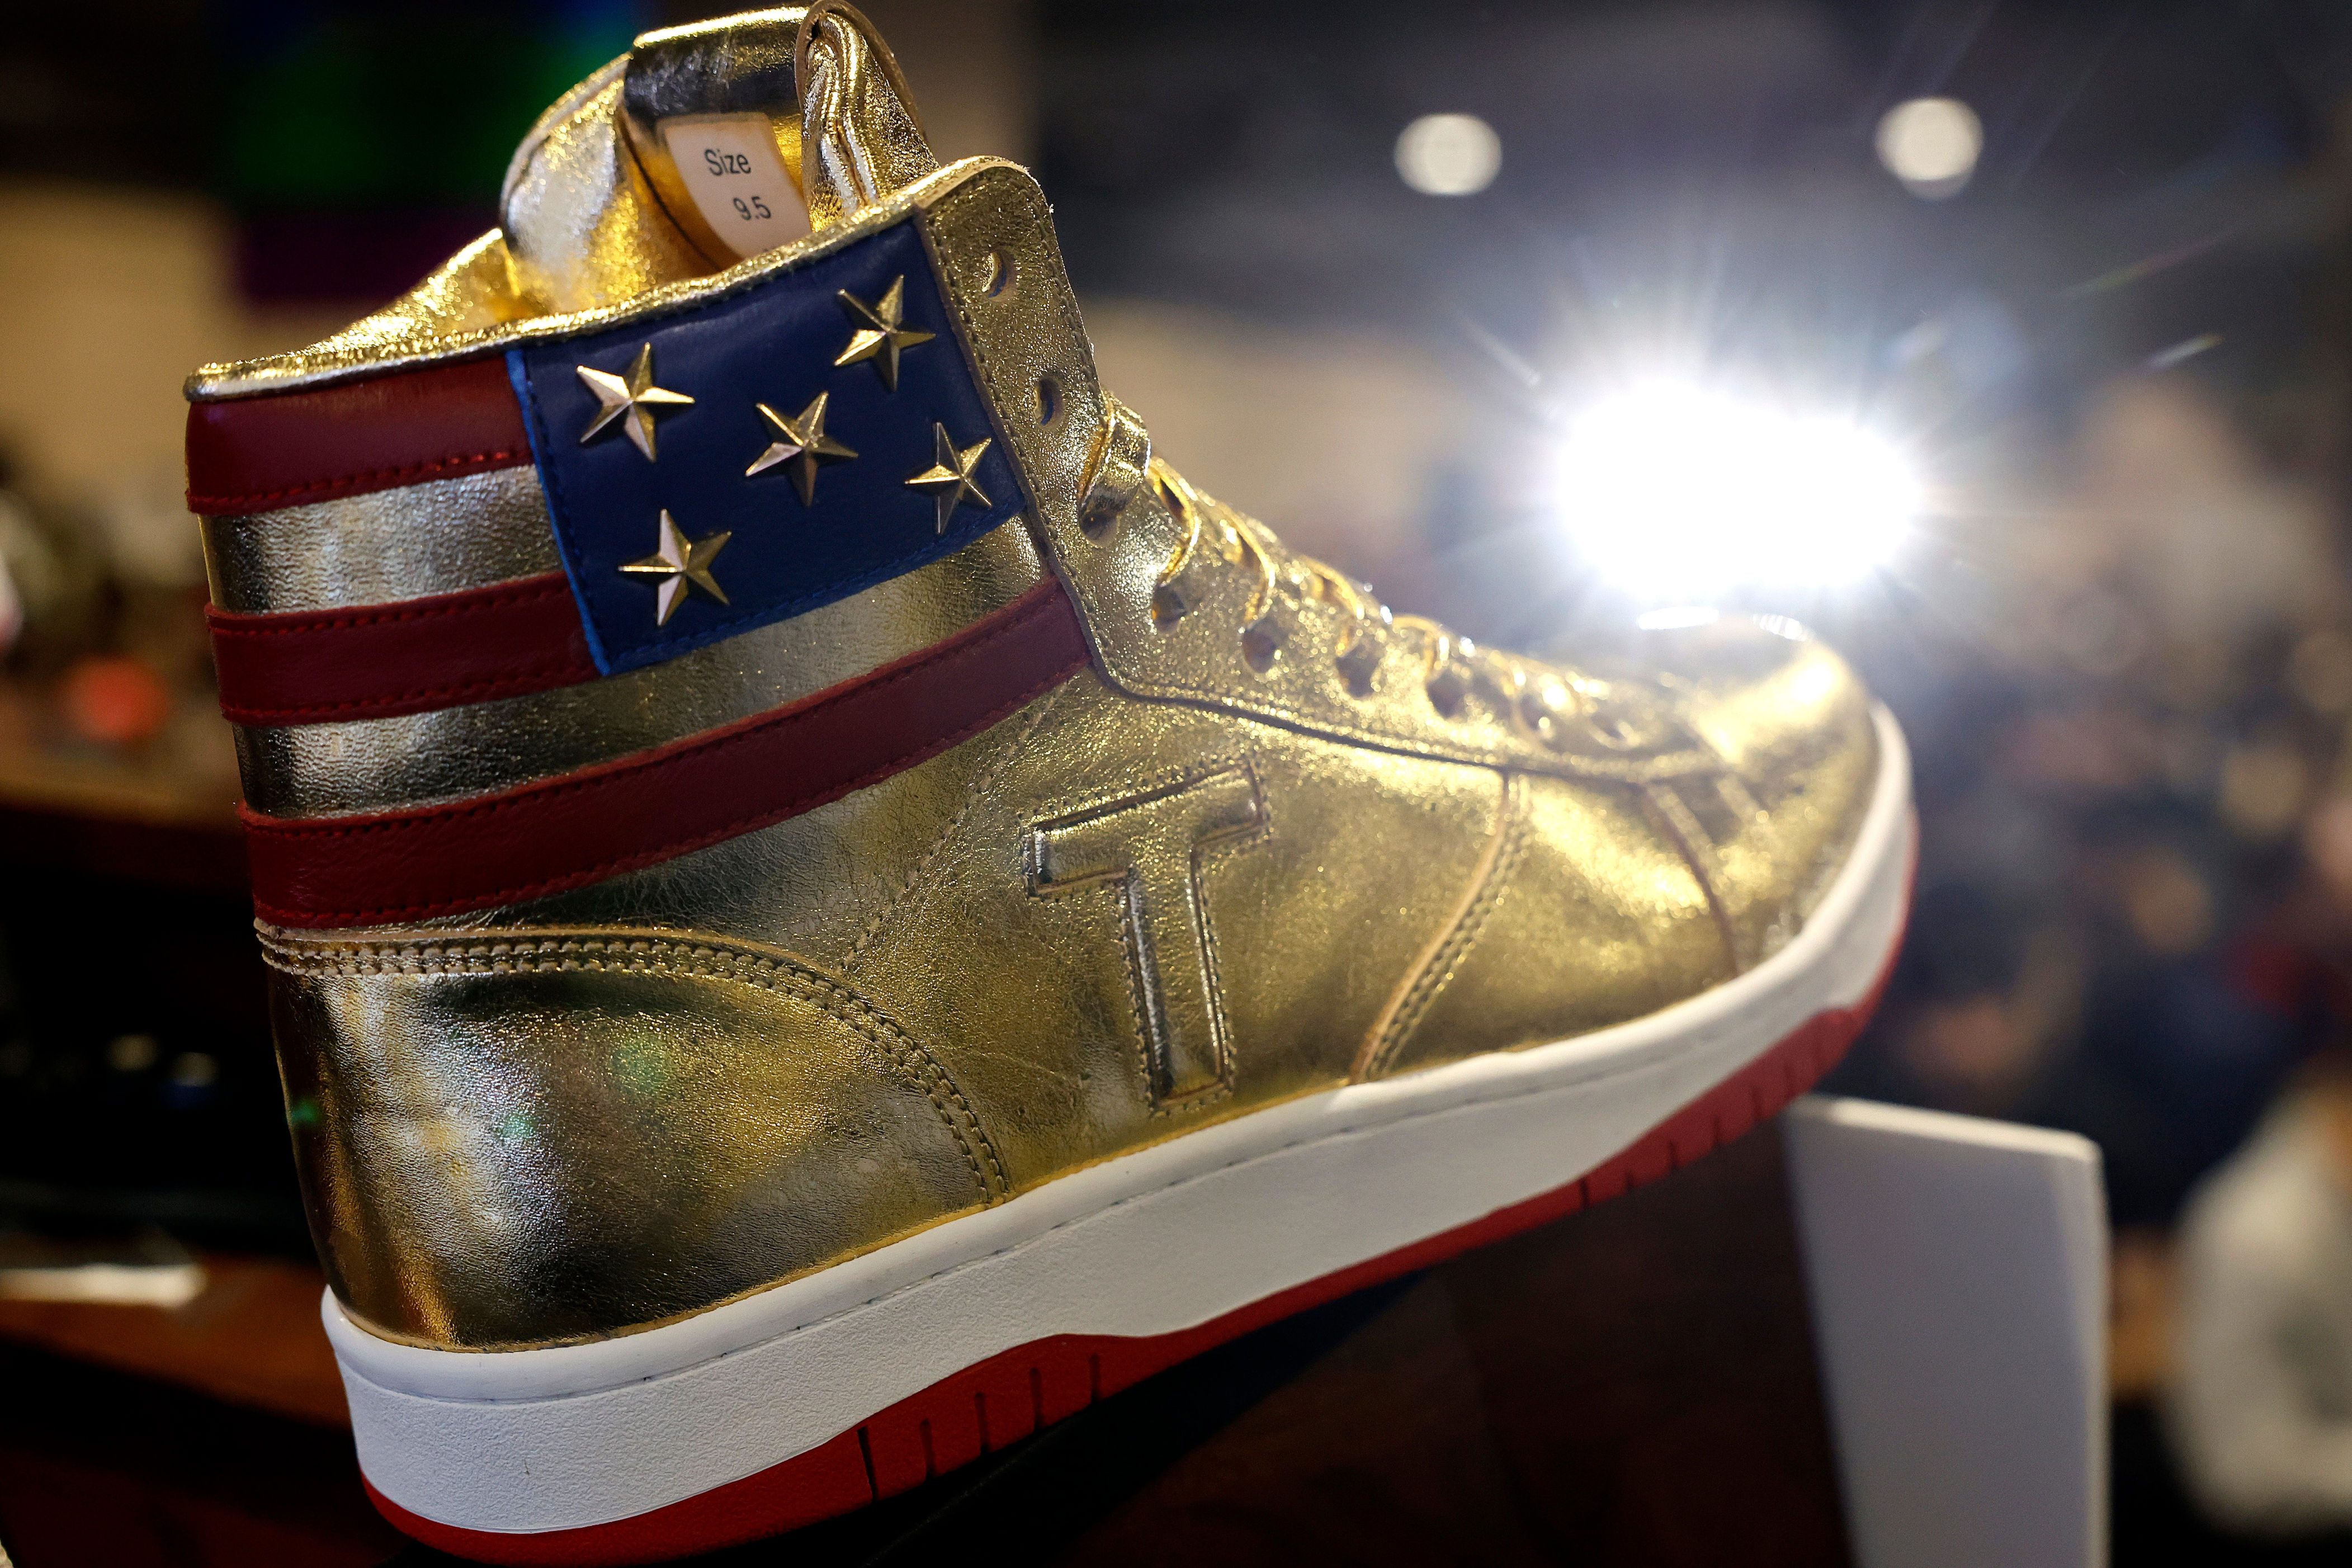 trump booed as he launches $399 sneaker the day after $350m fraud fine